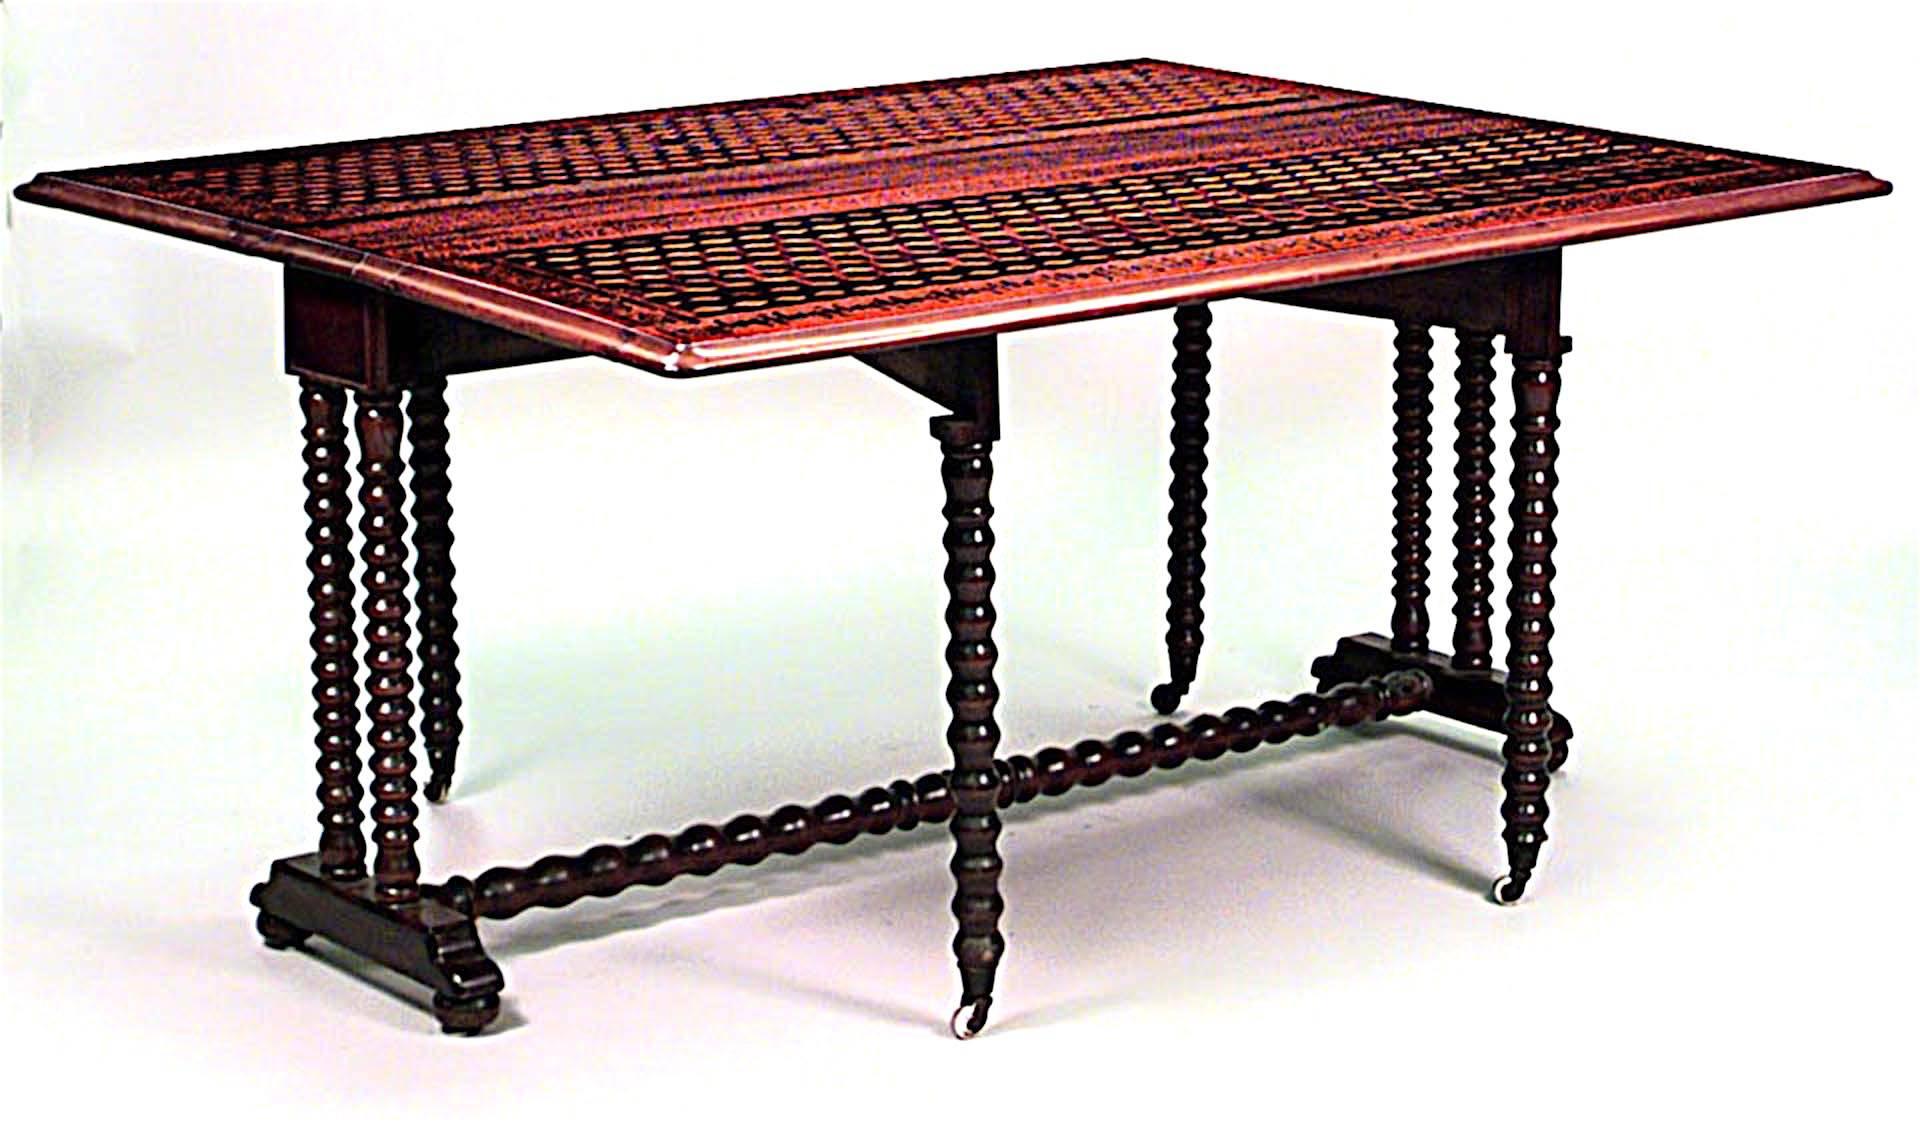 Italian Renaissance-style (19th Century) mahogany drop leaf dining table with spool legs and stretcher and inlaid geometric top
